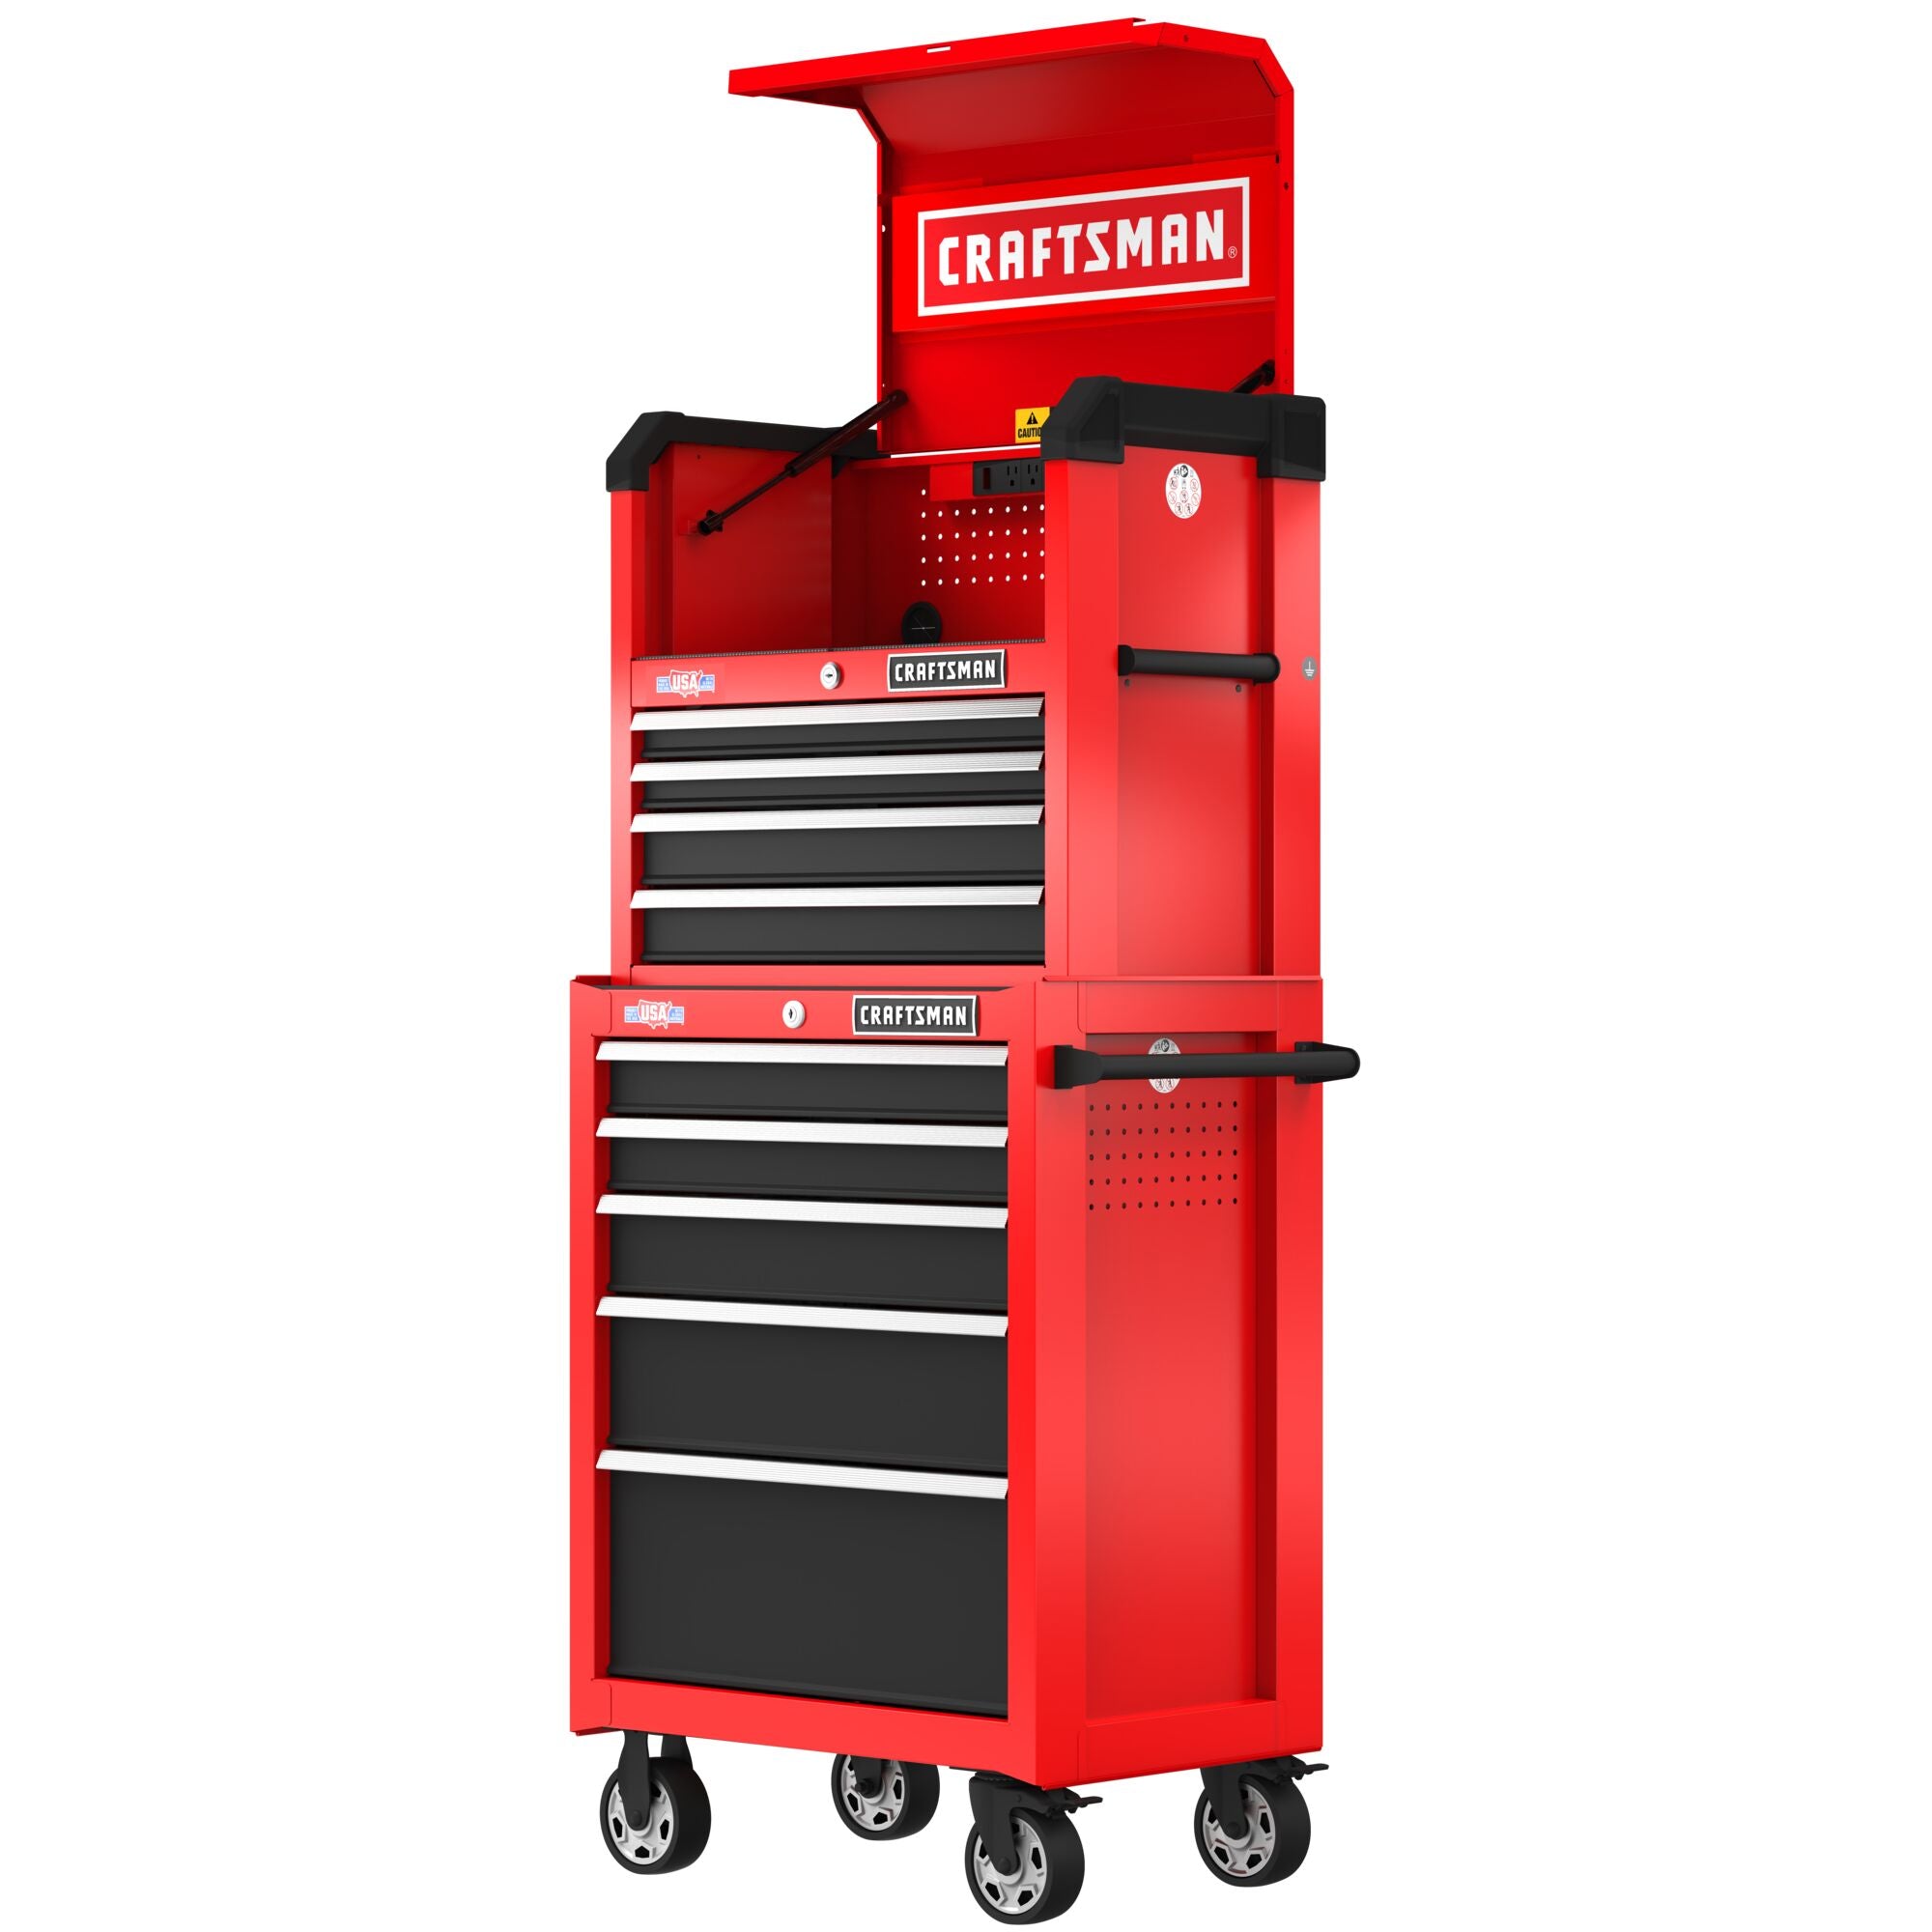 26 inch 5 drawer rolling tool cabinet with 26 inch 4 drawer tool chest.